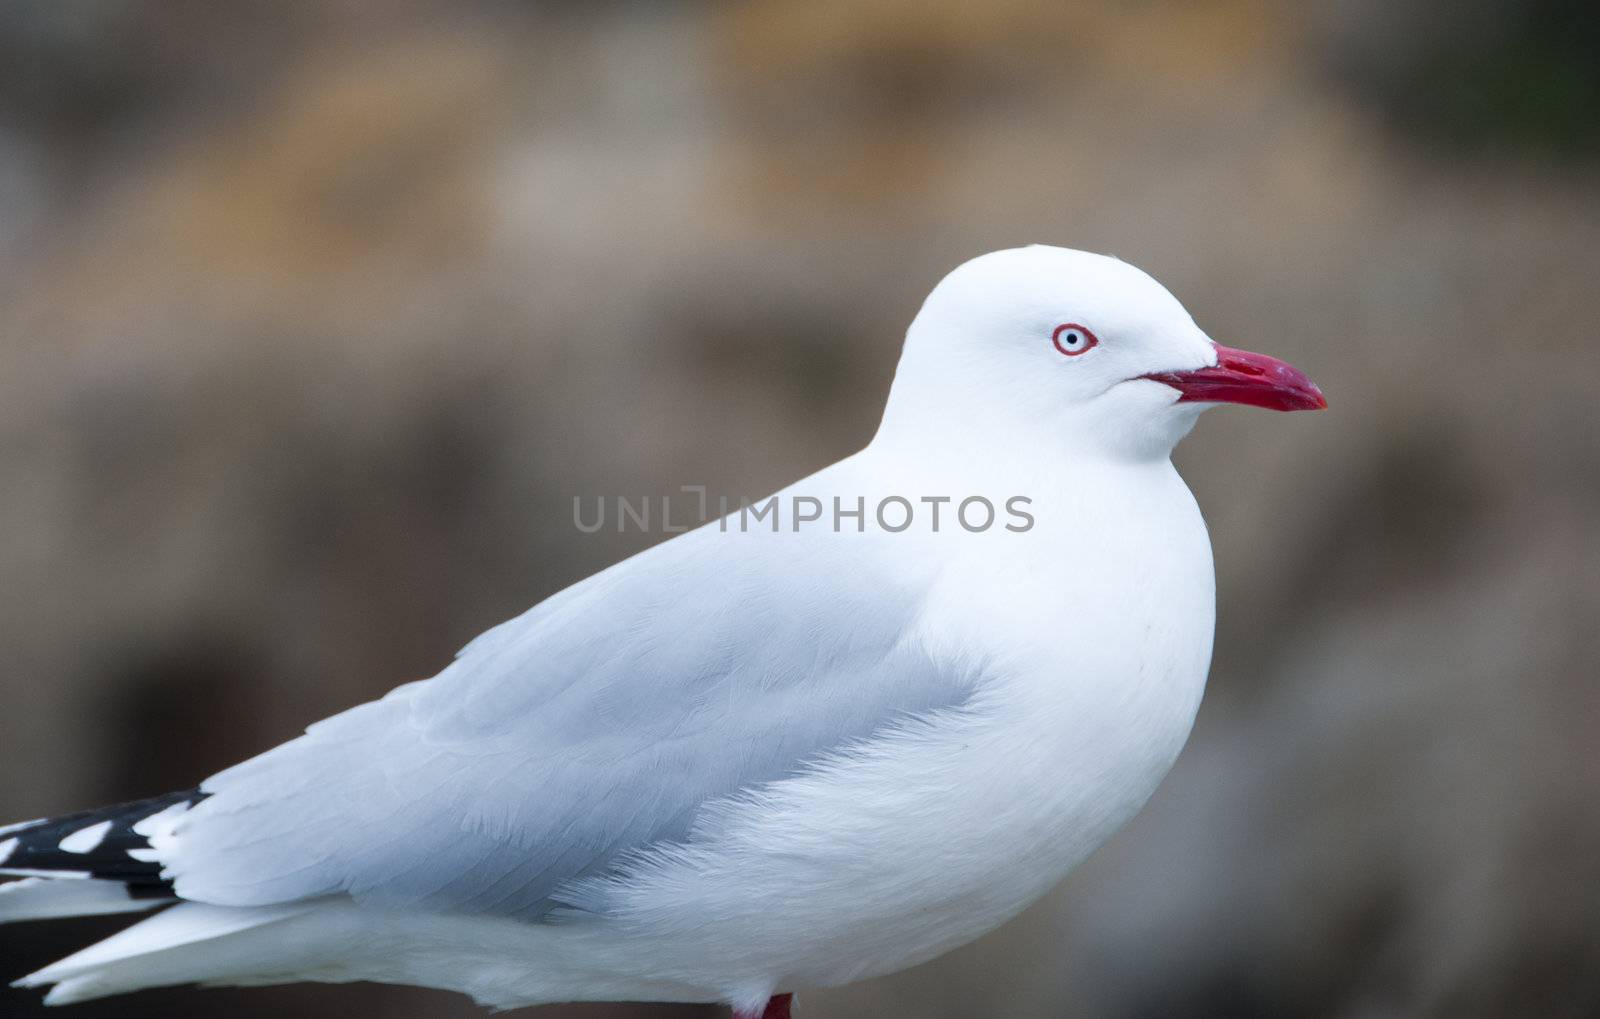 Seagull by urmoments